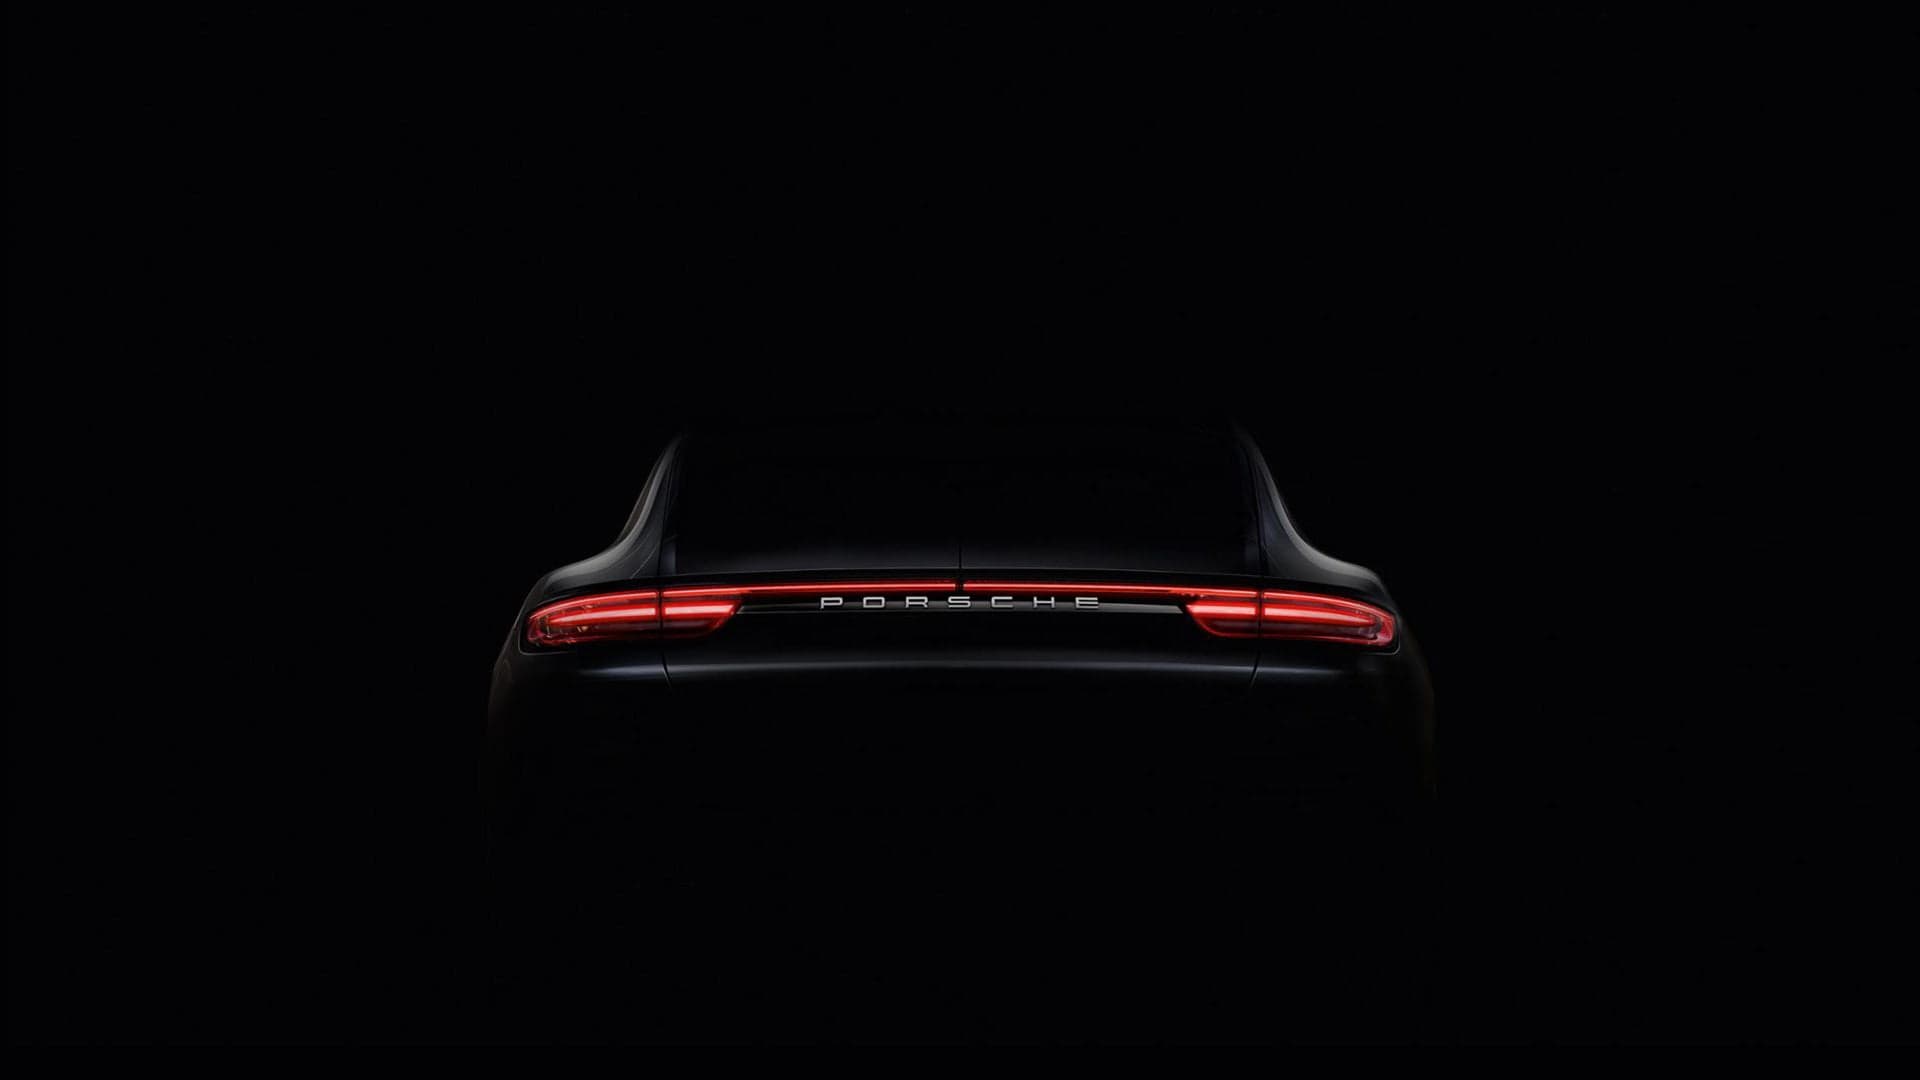 This Is What the New Porsche Panamera’s Rear End Looks Like